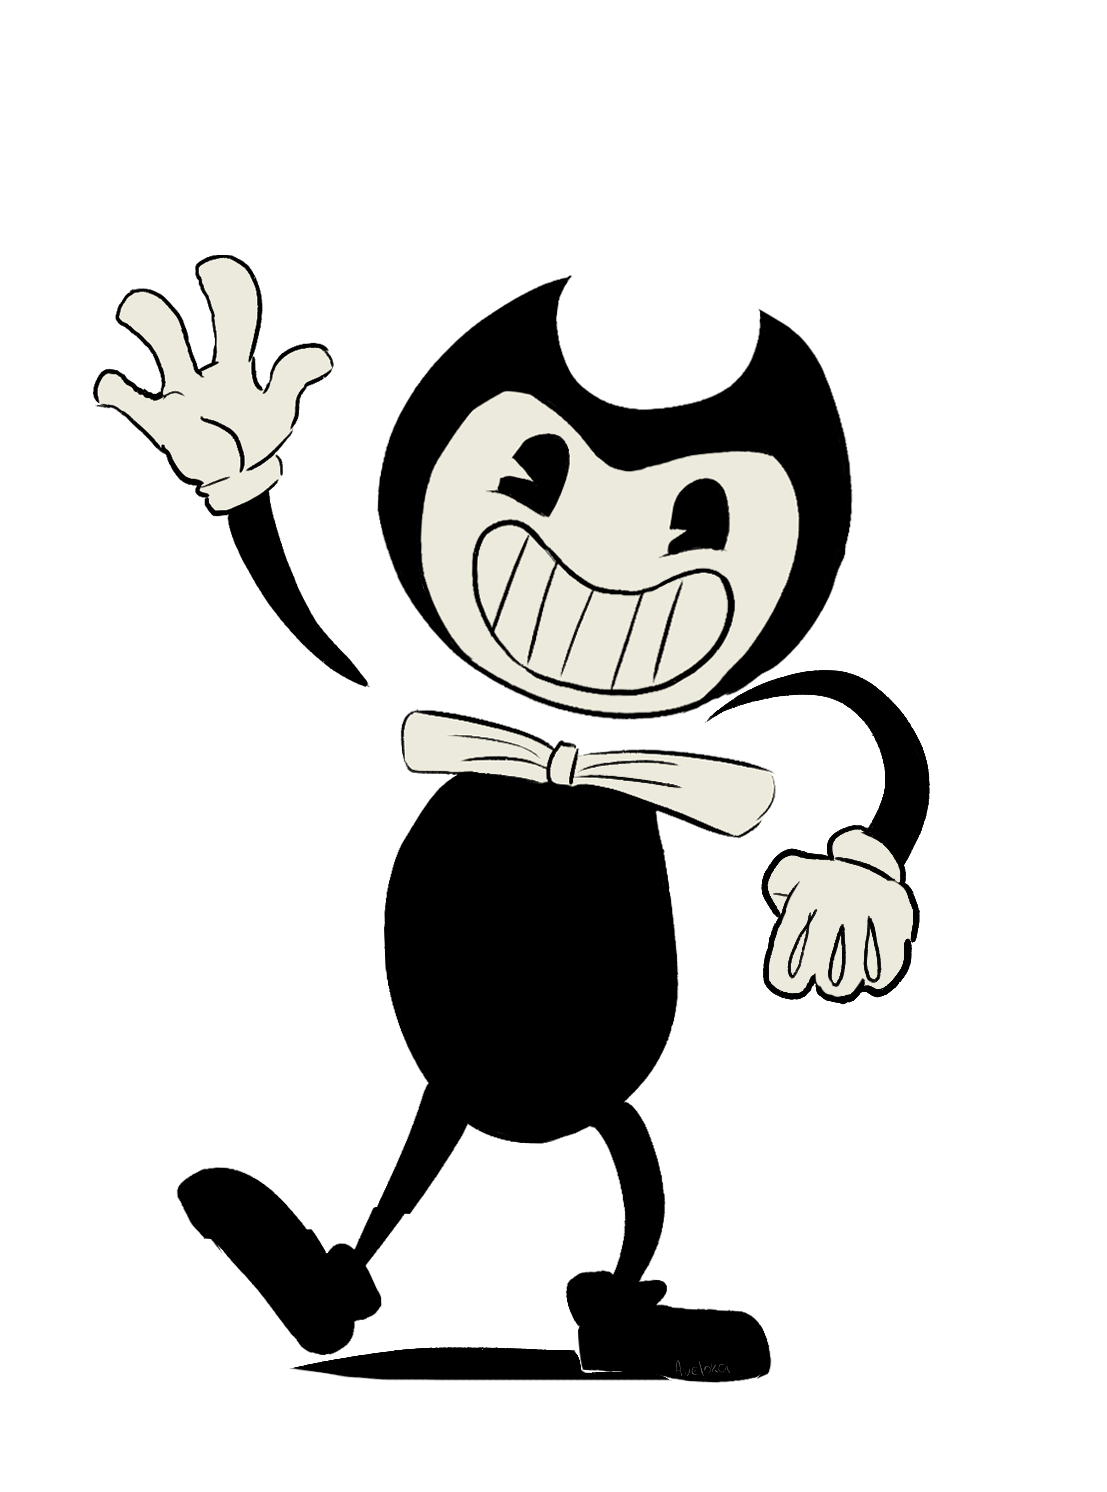 bendy-and-the-ink-machine-by-aveloka-on-deviantart